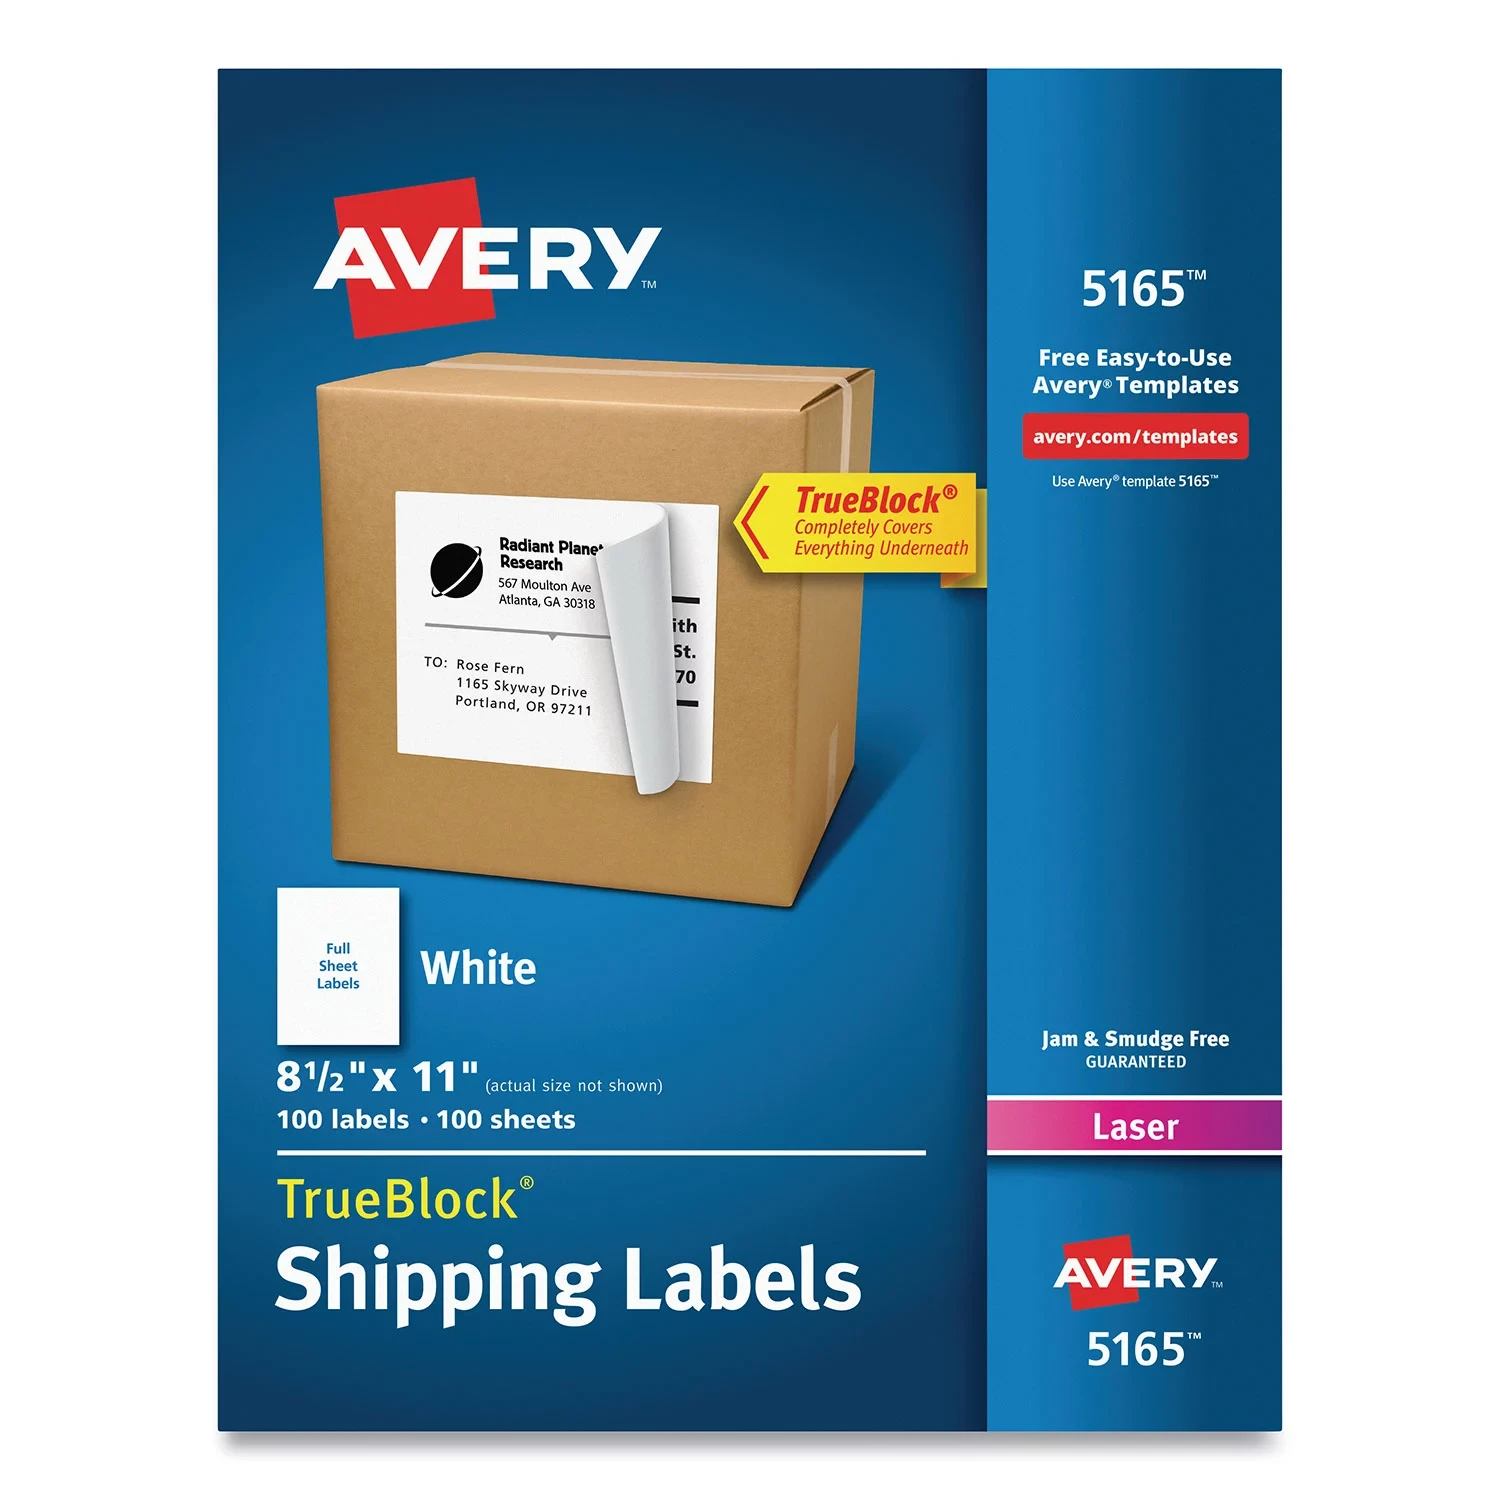 Avery Shipping Labels With TrueBlock Technology, Laser Printers, 8.5 x 11, White, 100/Box